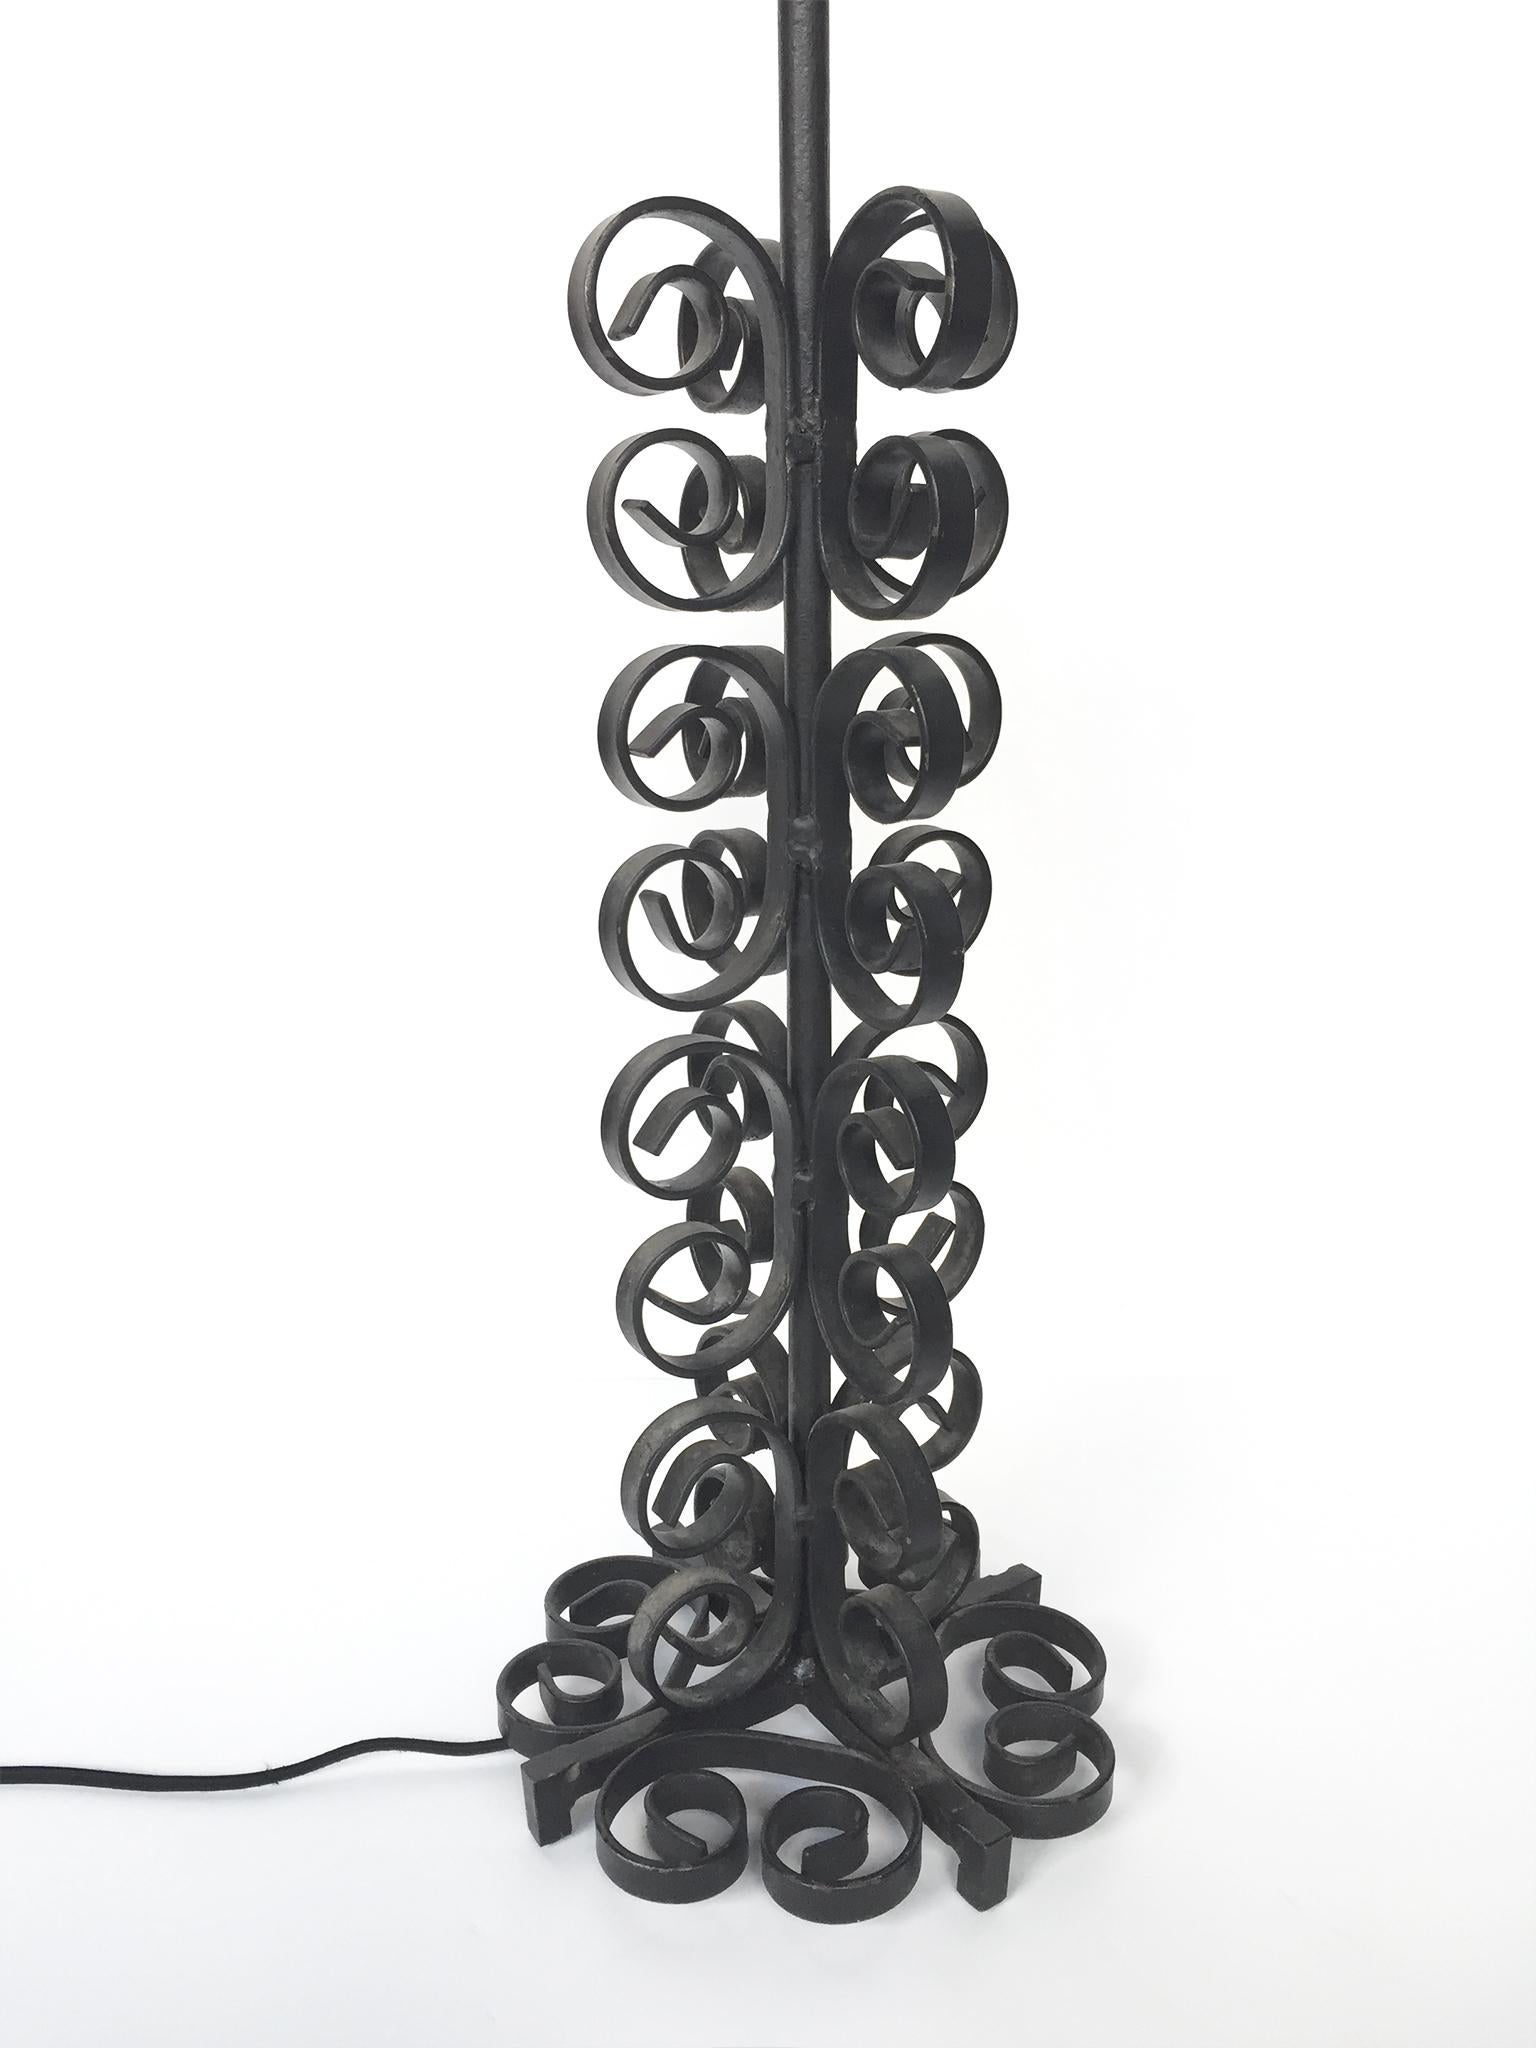 American Mid-20th Century Wrought Iron Table Lamp in the Style of Paul Kiss